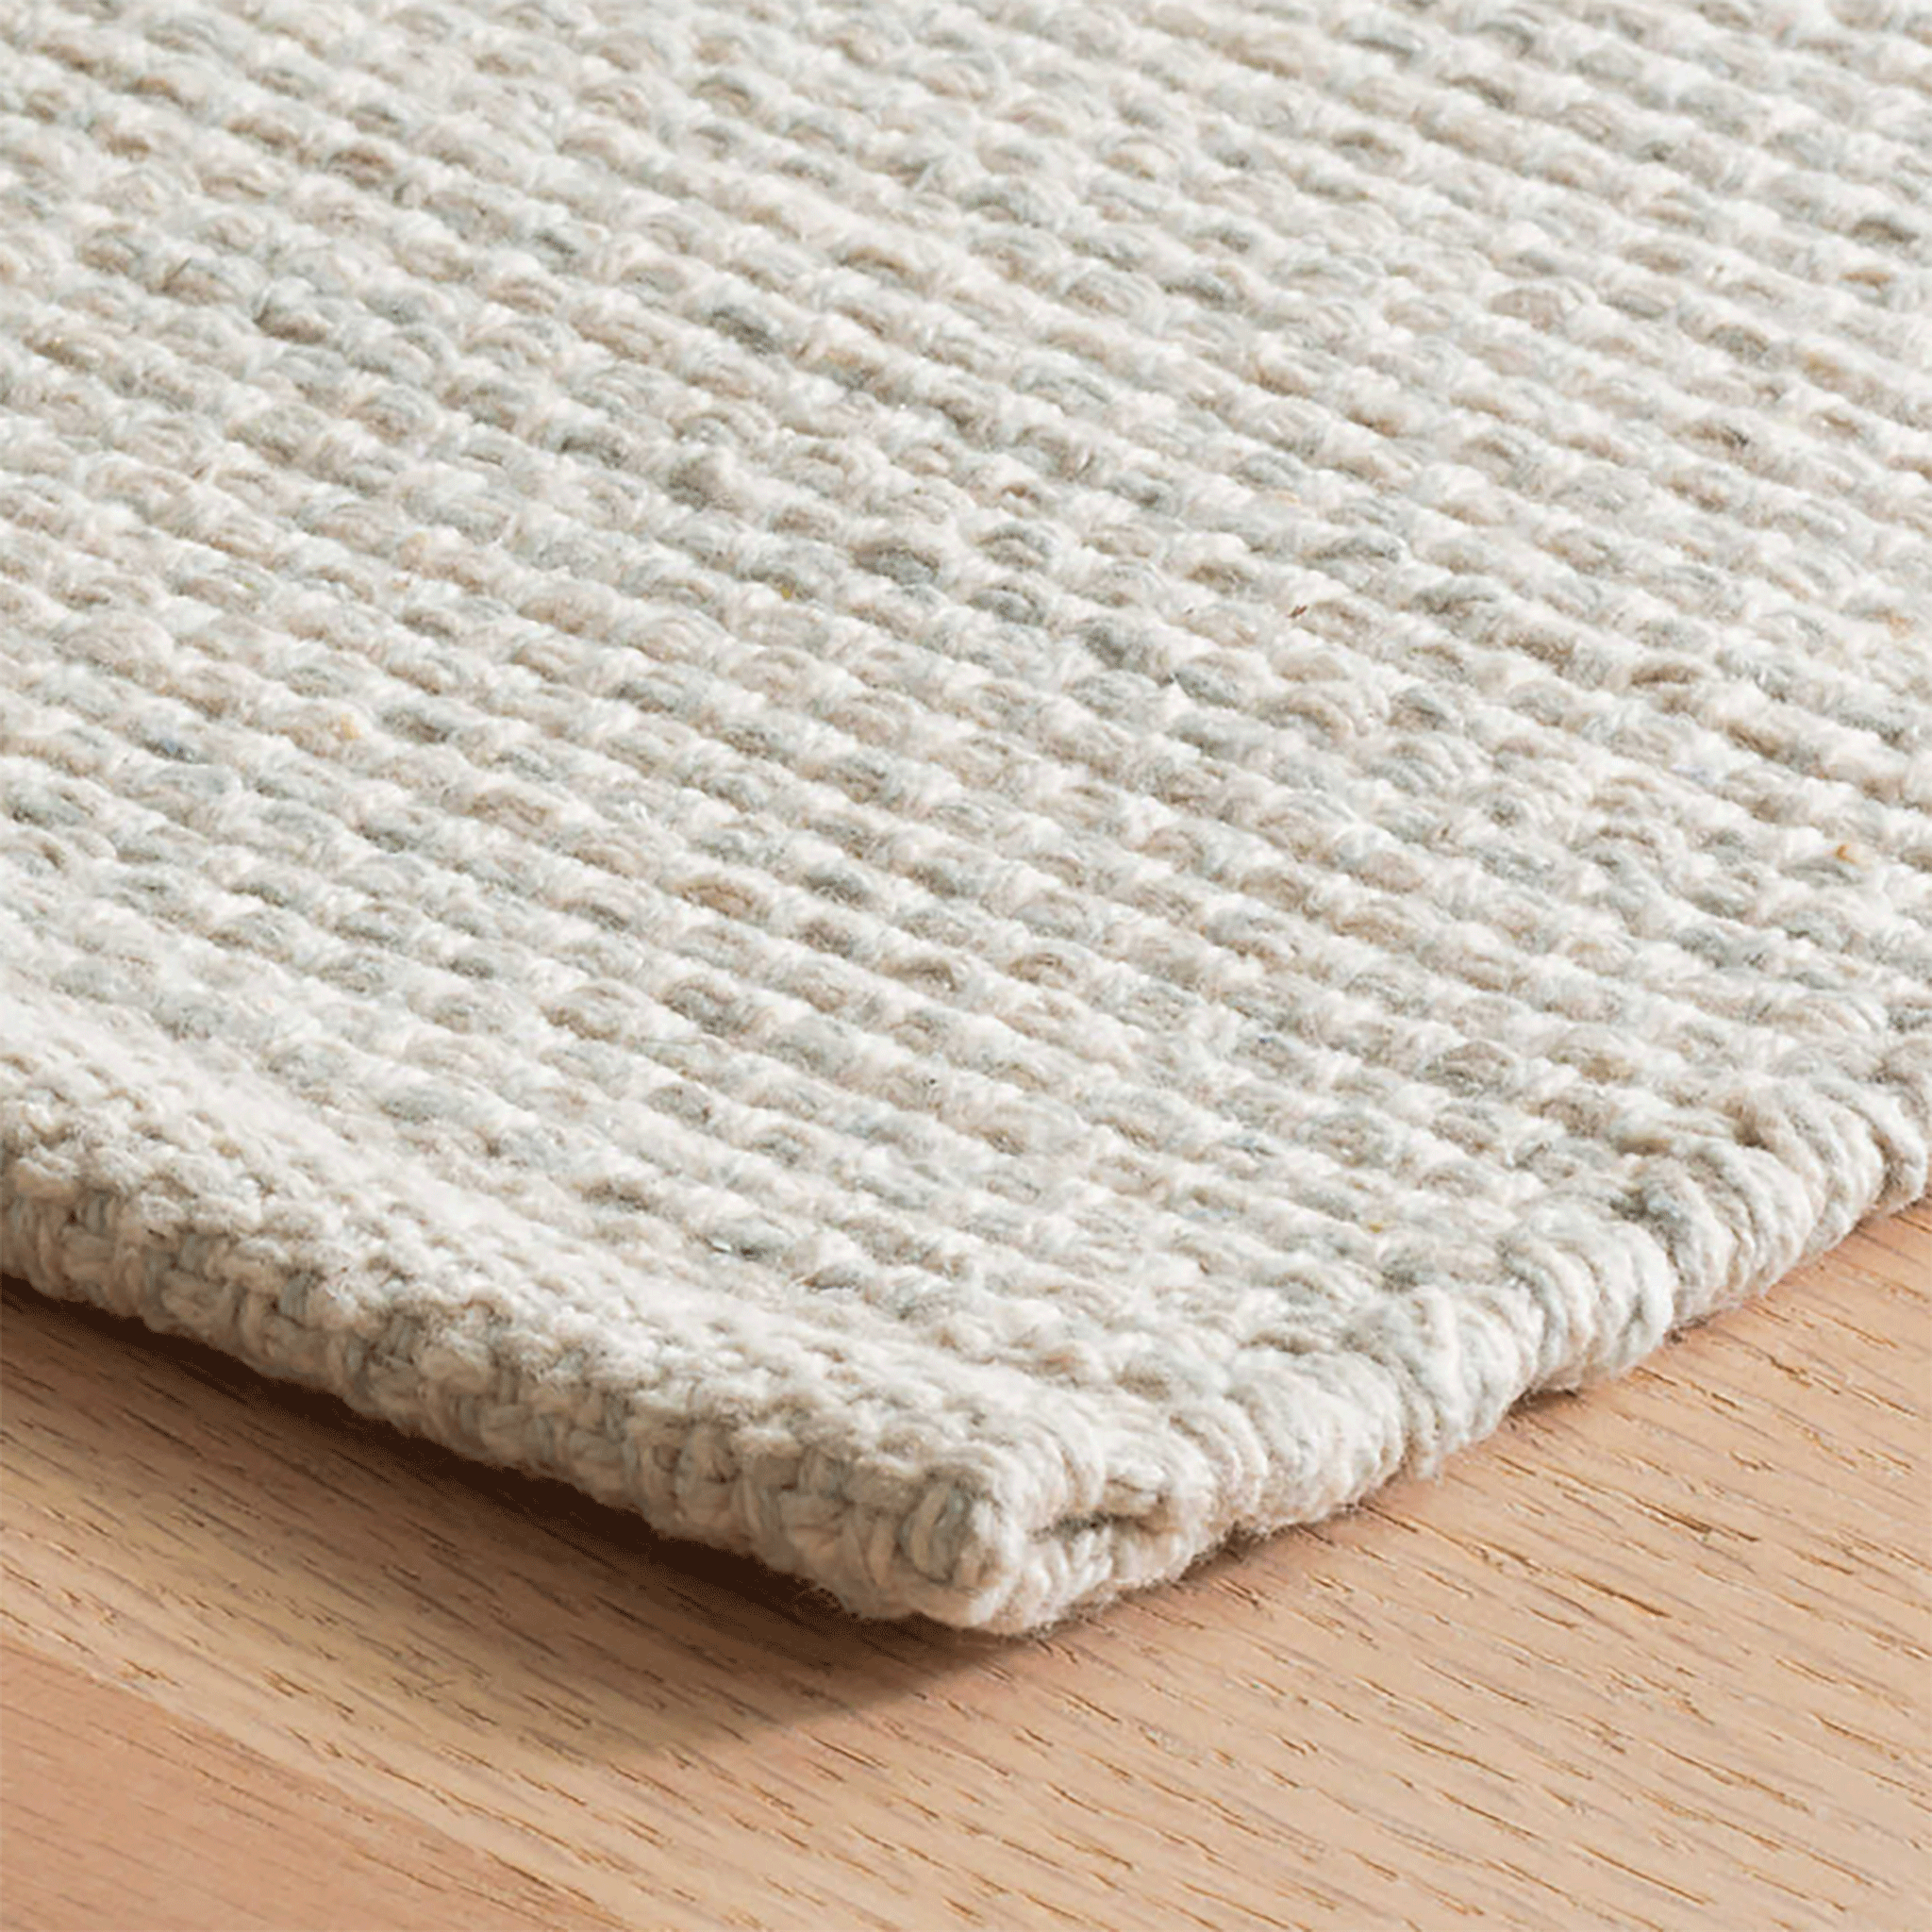 Marled Light Blue Woven Cotton Rug